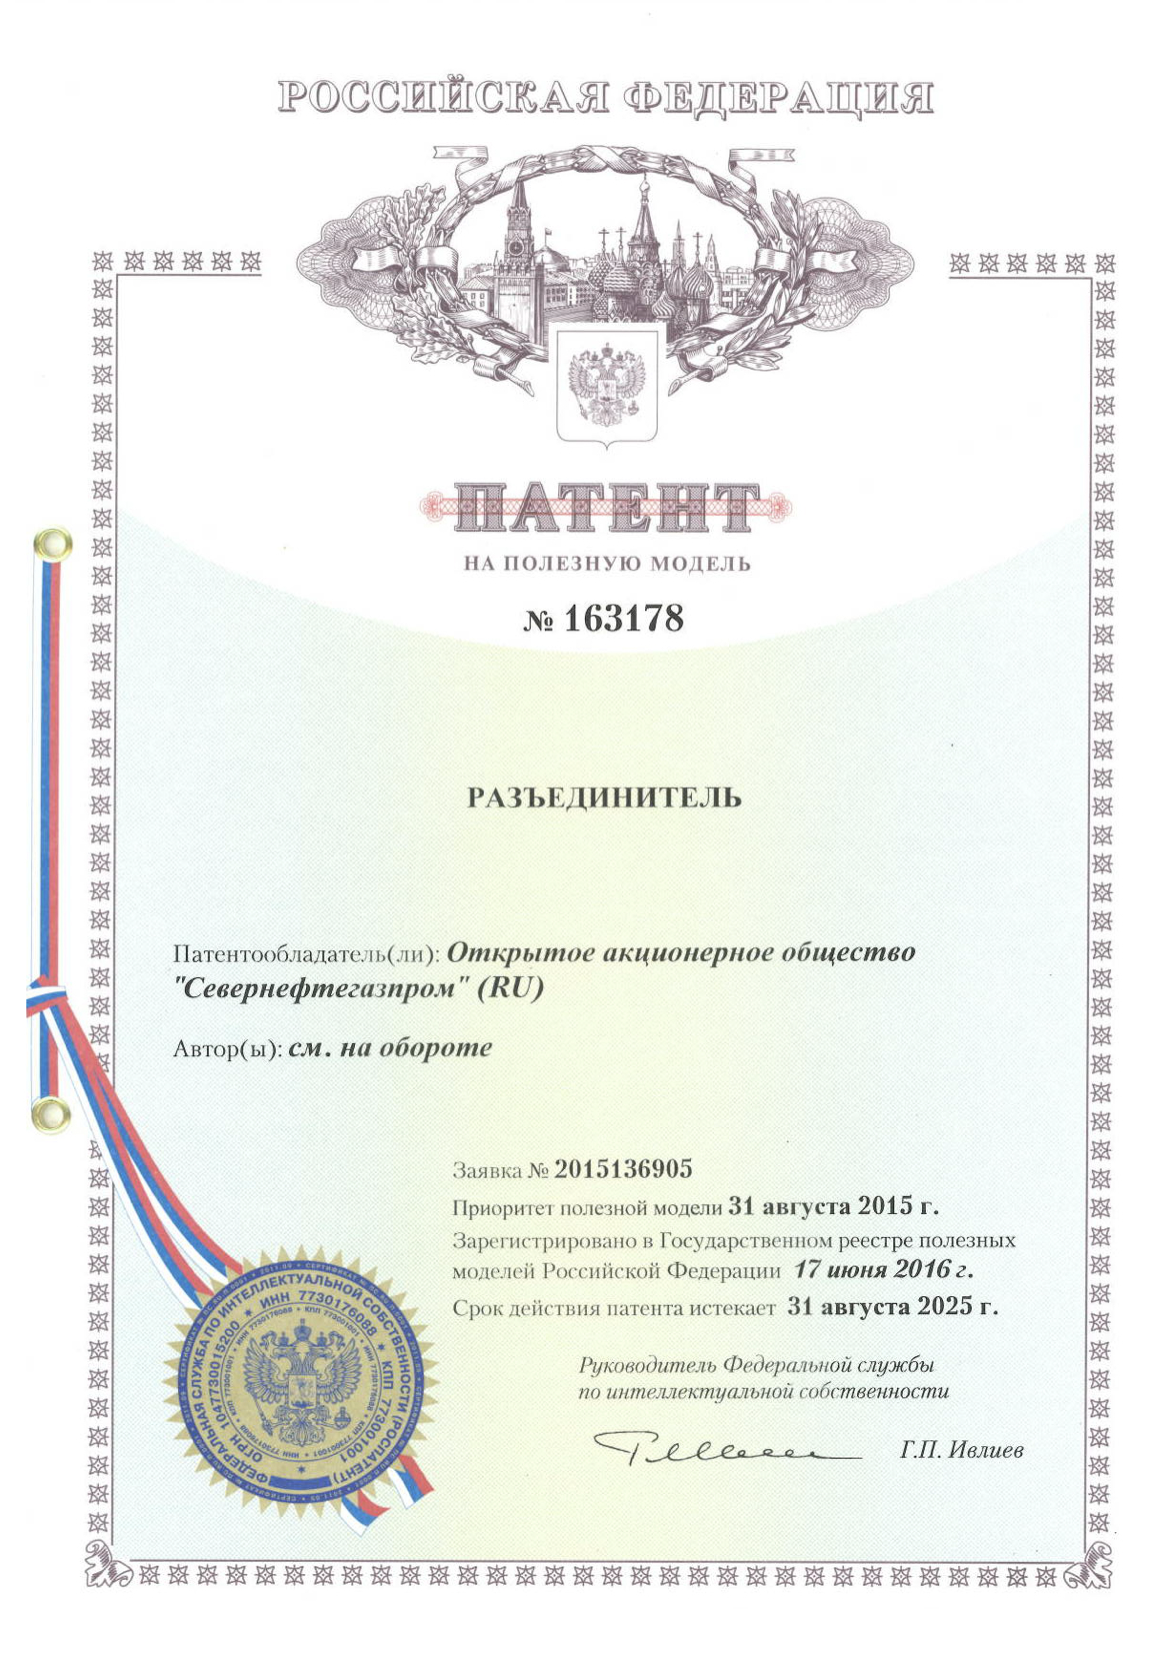 Patent for useful model №163178